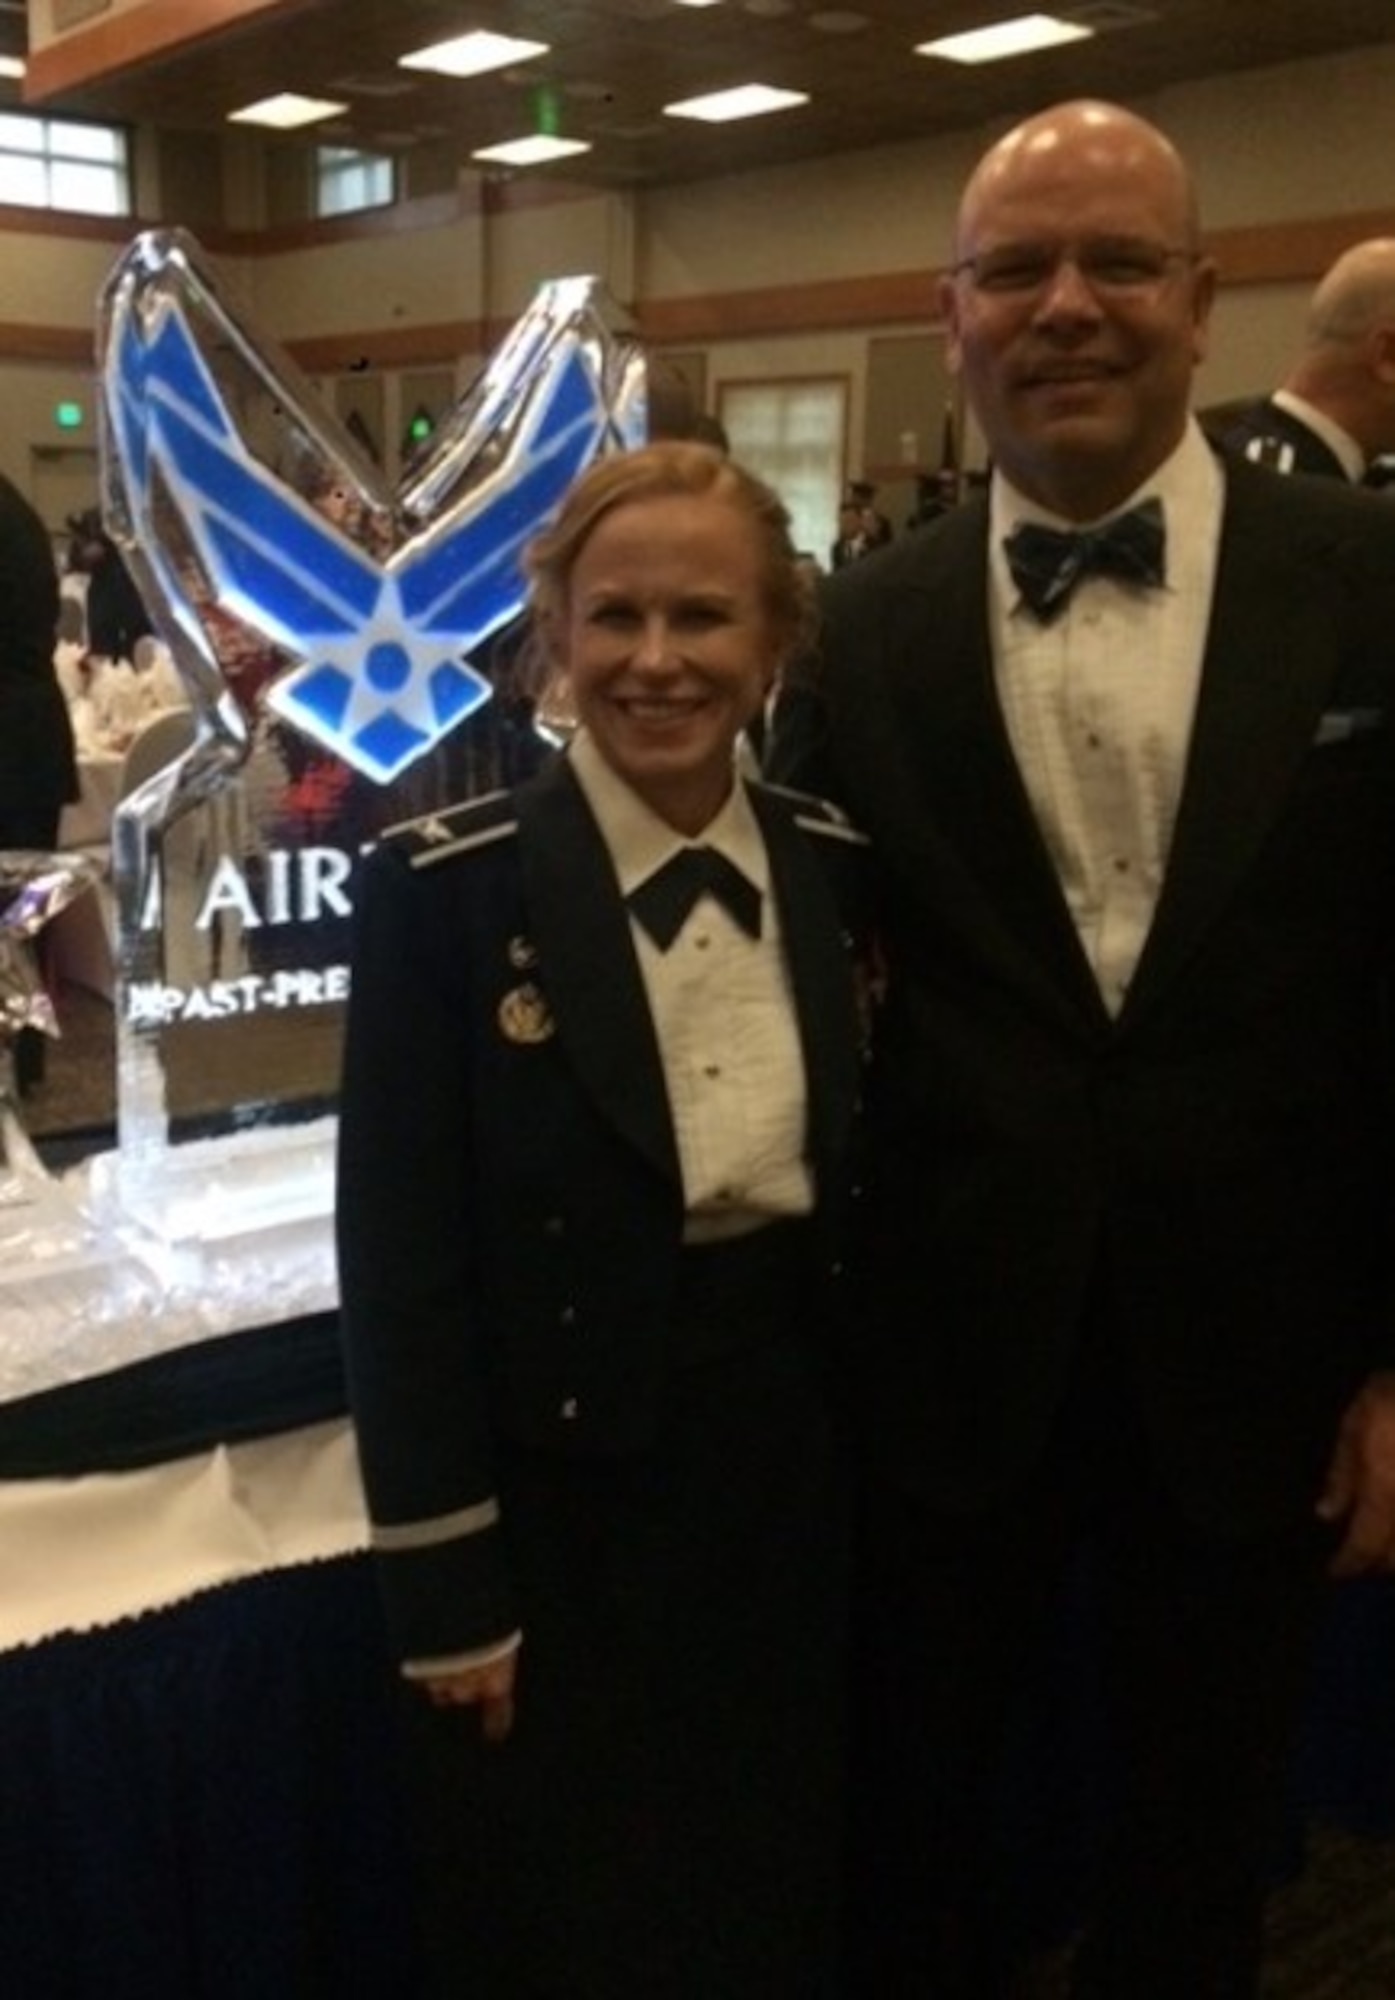 Col. Anita Feugate Opperman, 341st Operations Group commander, and her husband Don pose for a picture at the Air Force Ball Sept. 17, 2016, at Malmstrom Air Force Base, Mont. Feugate Opperman assumed command of the 341st OG June 24. (U.S. Air Force courtesy photo) 

